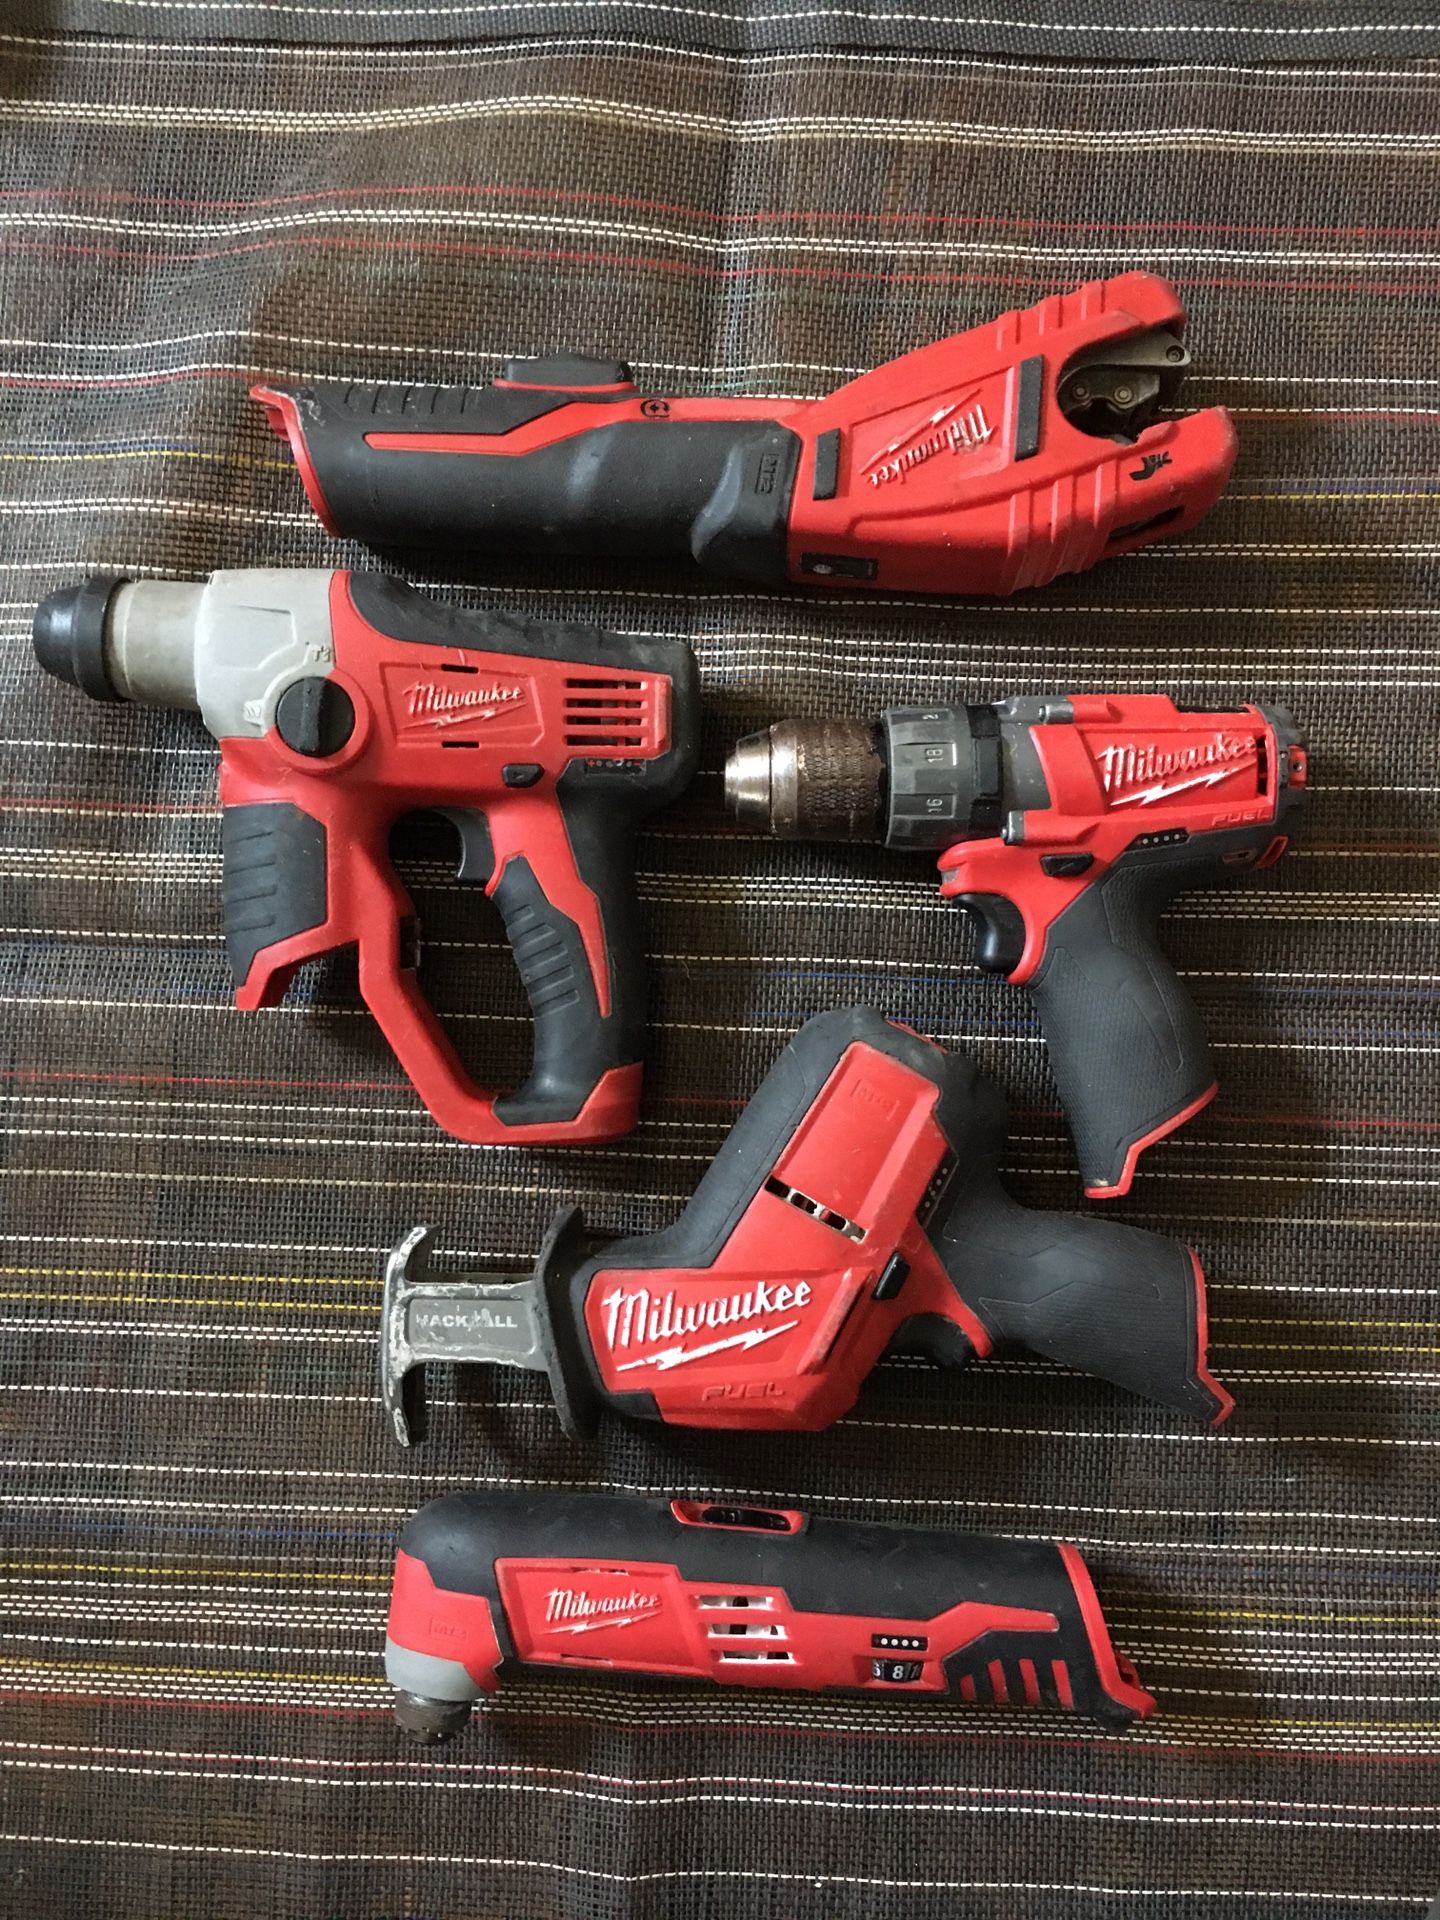 Milwaukee 12v tolls good condition (((( no charge no battery))))